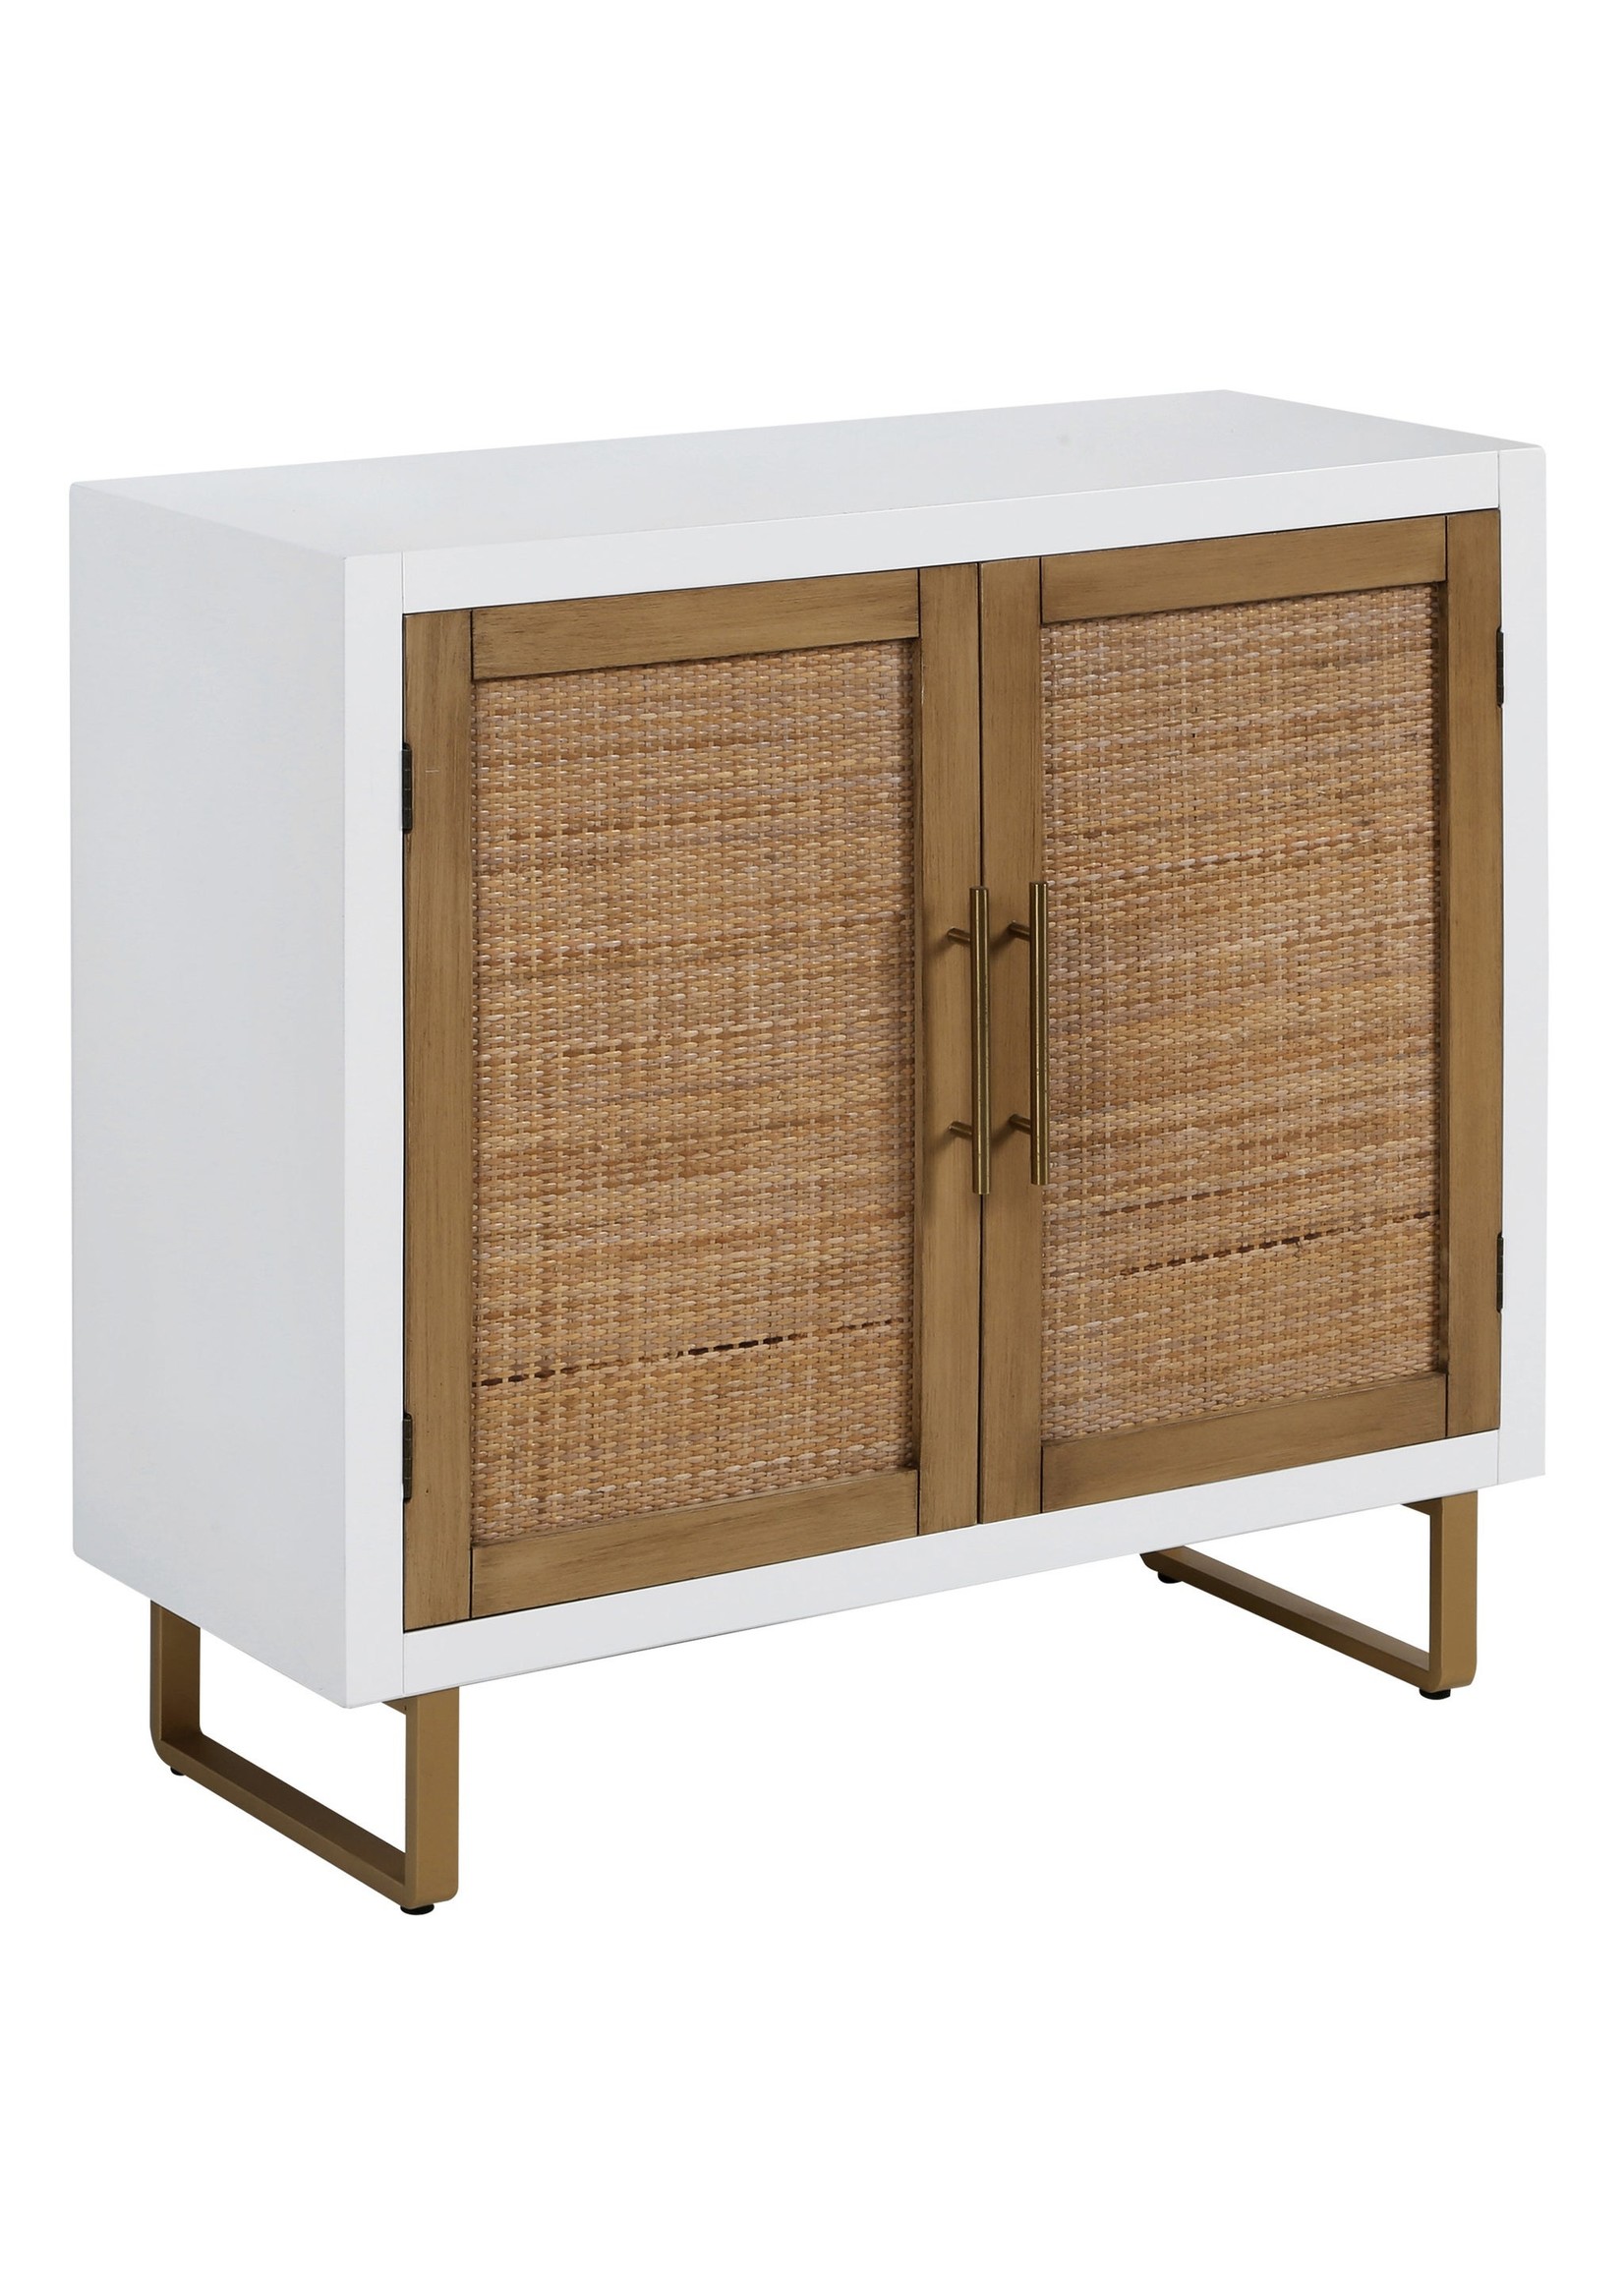 Style Craft TWEED & WHITE Two Door Wooden Cabinet 34in ht. X 36in w. X 14in d.